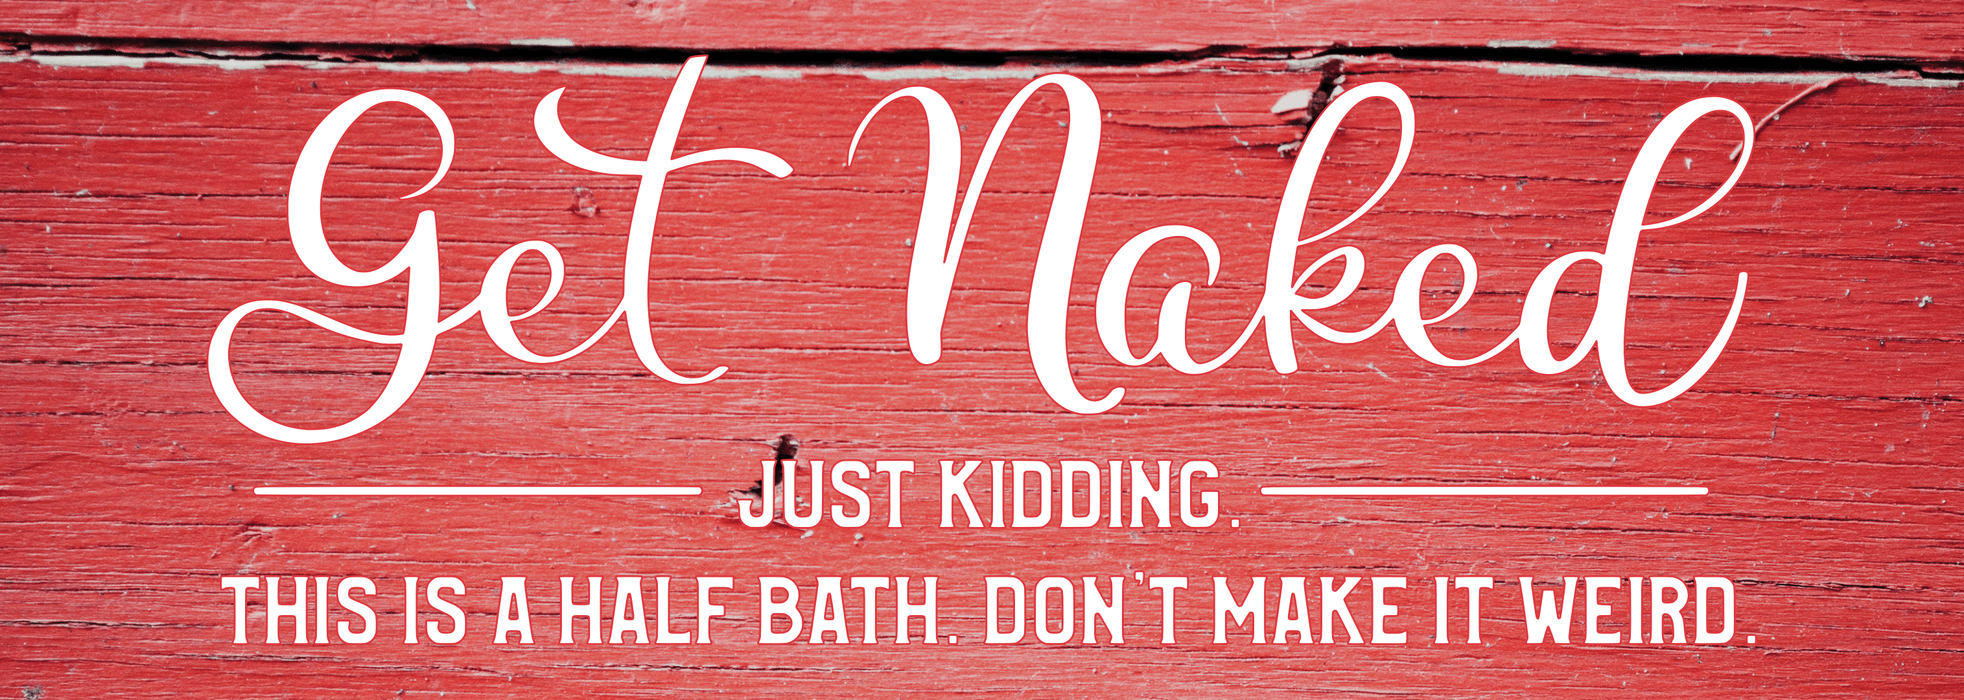 Get Naked: Just Kidding This is a Half Bath - Red Barn Wood